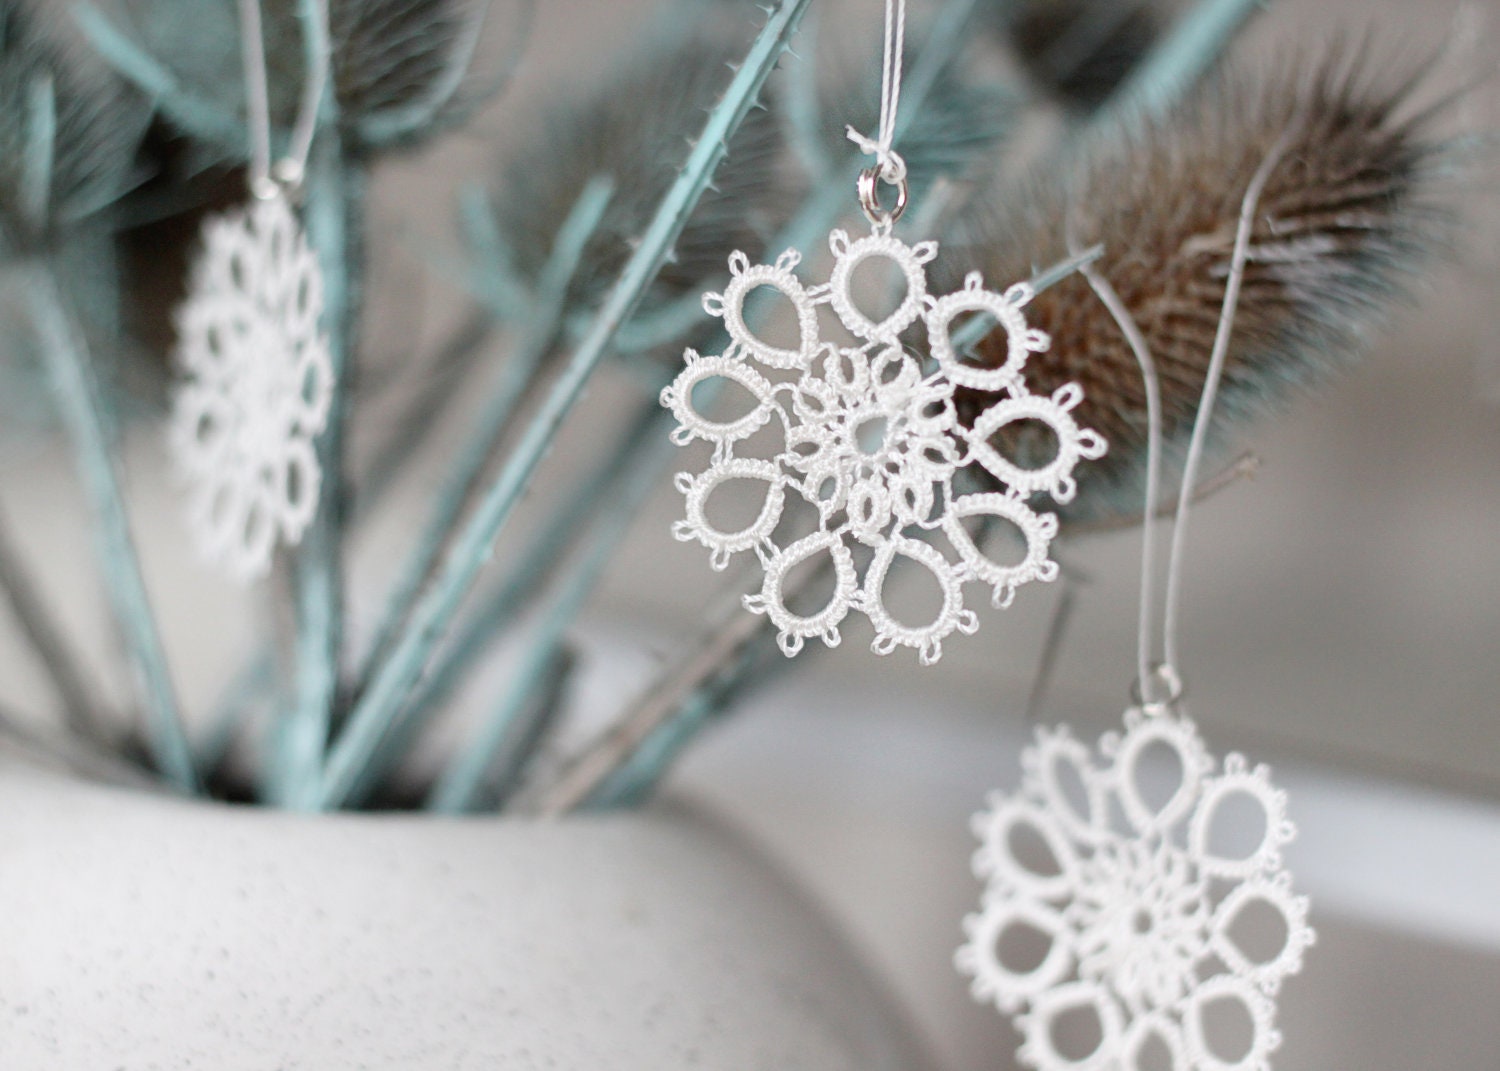 a white Christmas - handmade tatted snowflakes - set of 6 - Christmas gifts, wedding favors, pendants, tree ornaments